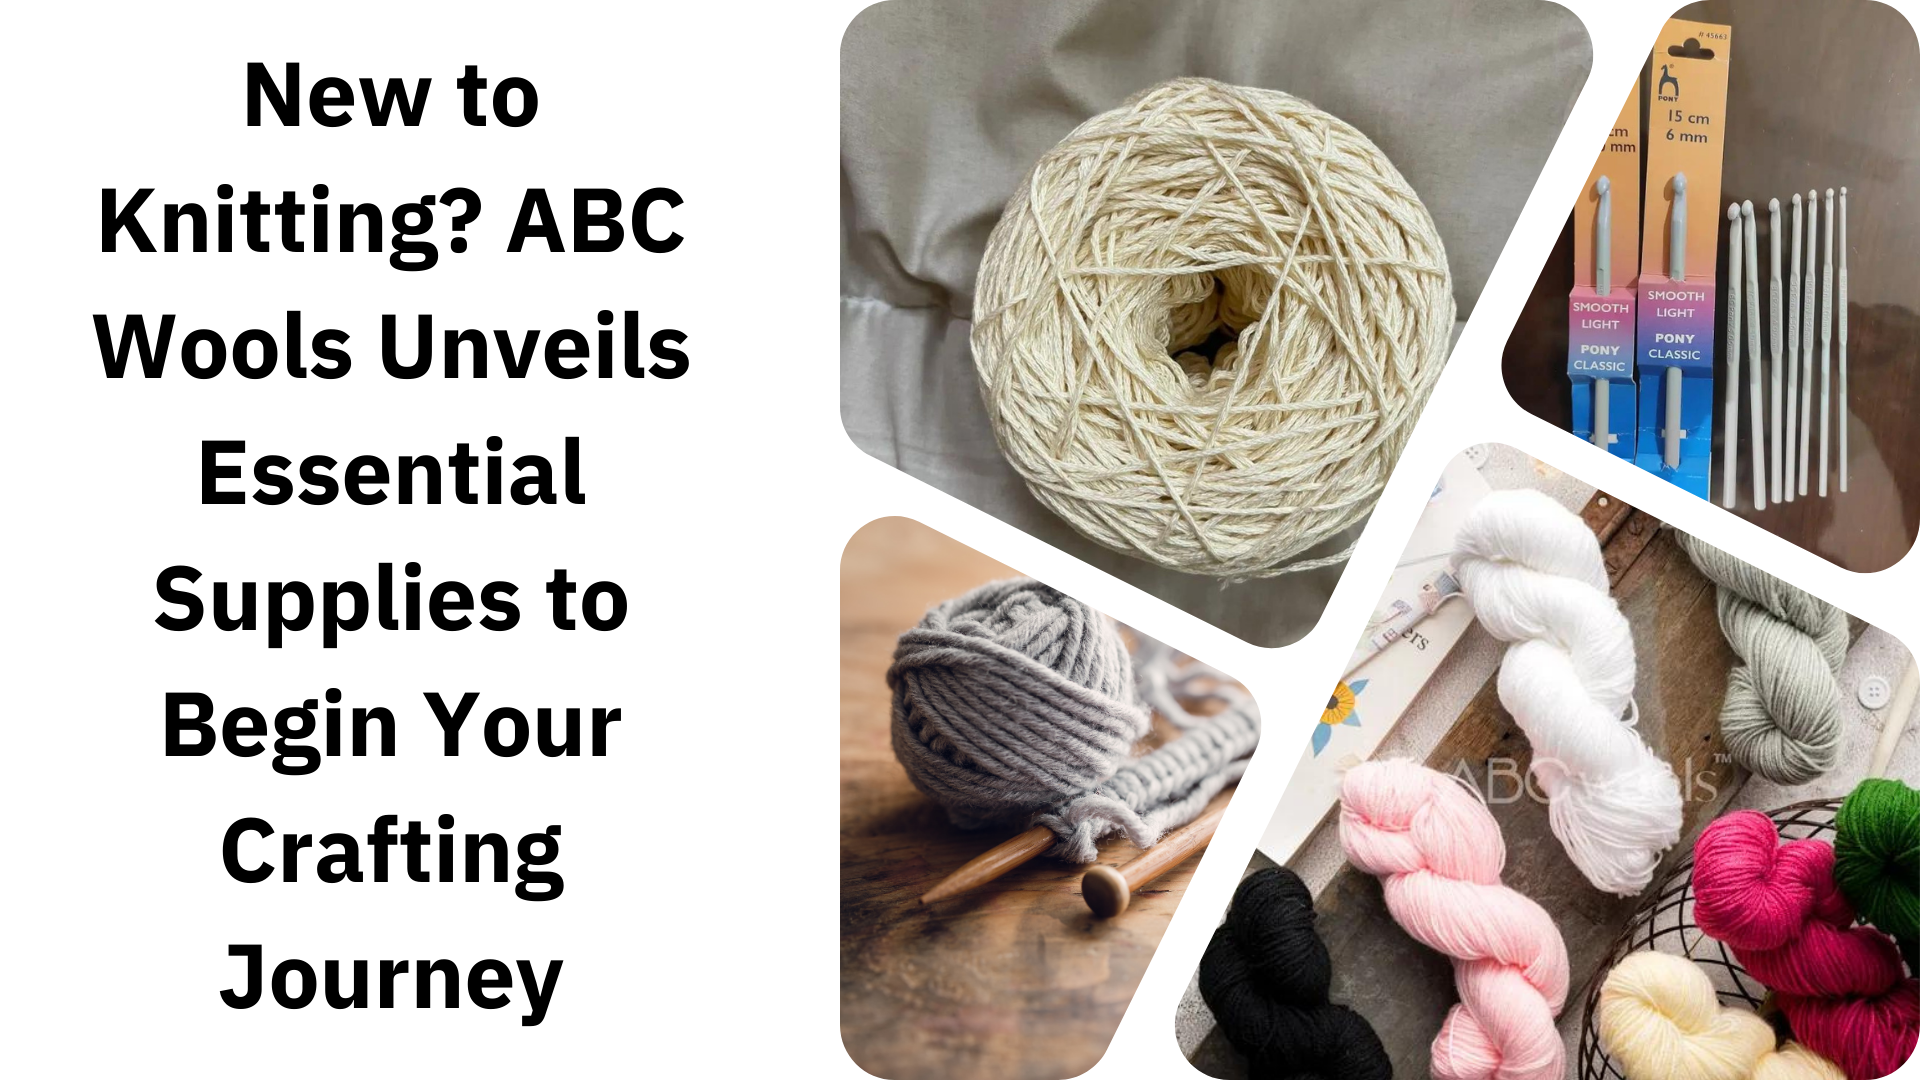 New to Knitting? ABC Wools Unveils Essential Supplies to Begin Your Crafting Journey